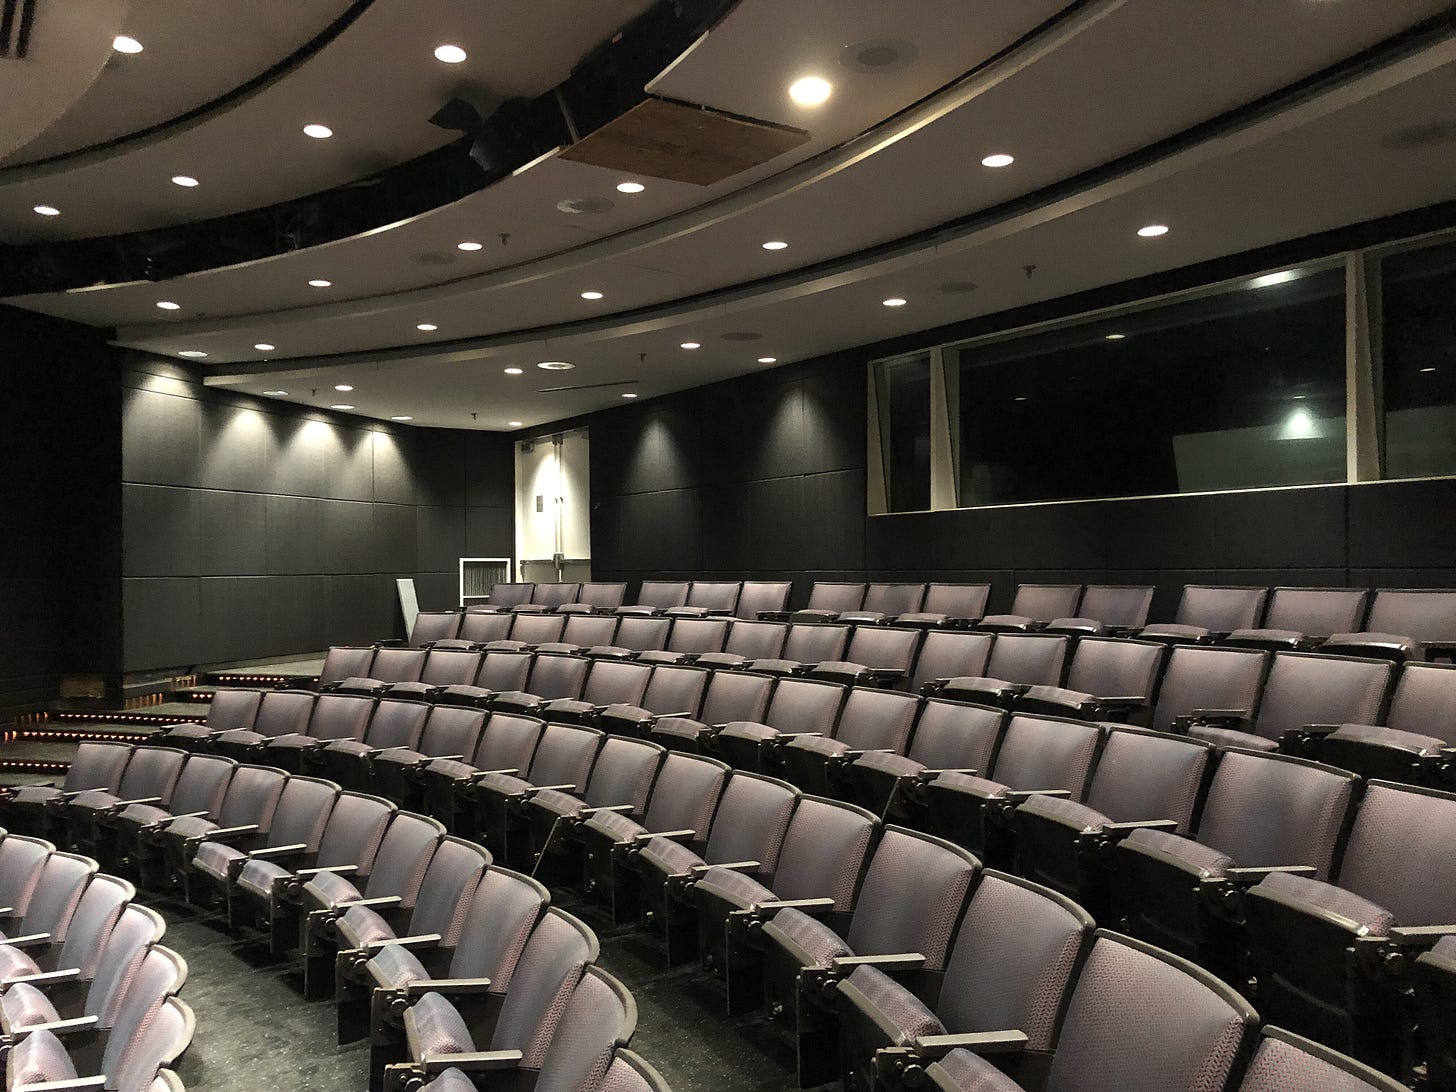 Theater seating